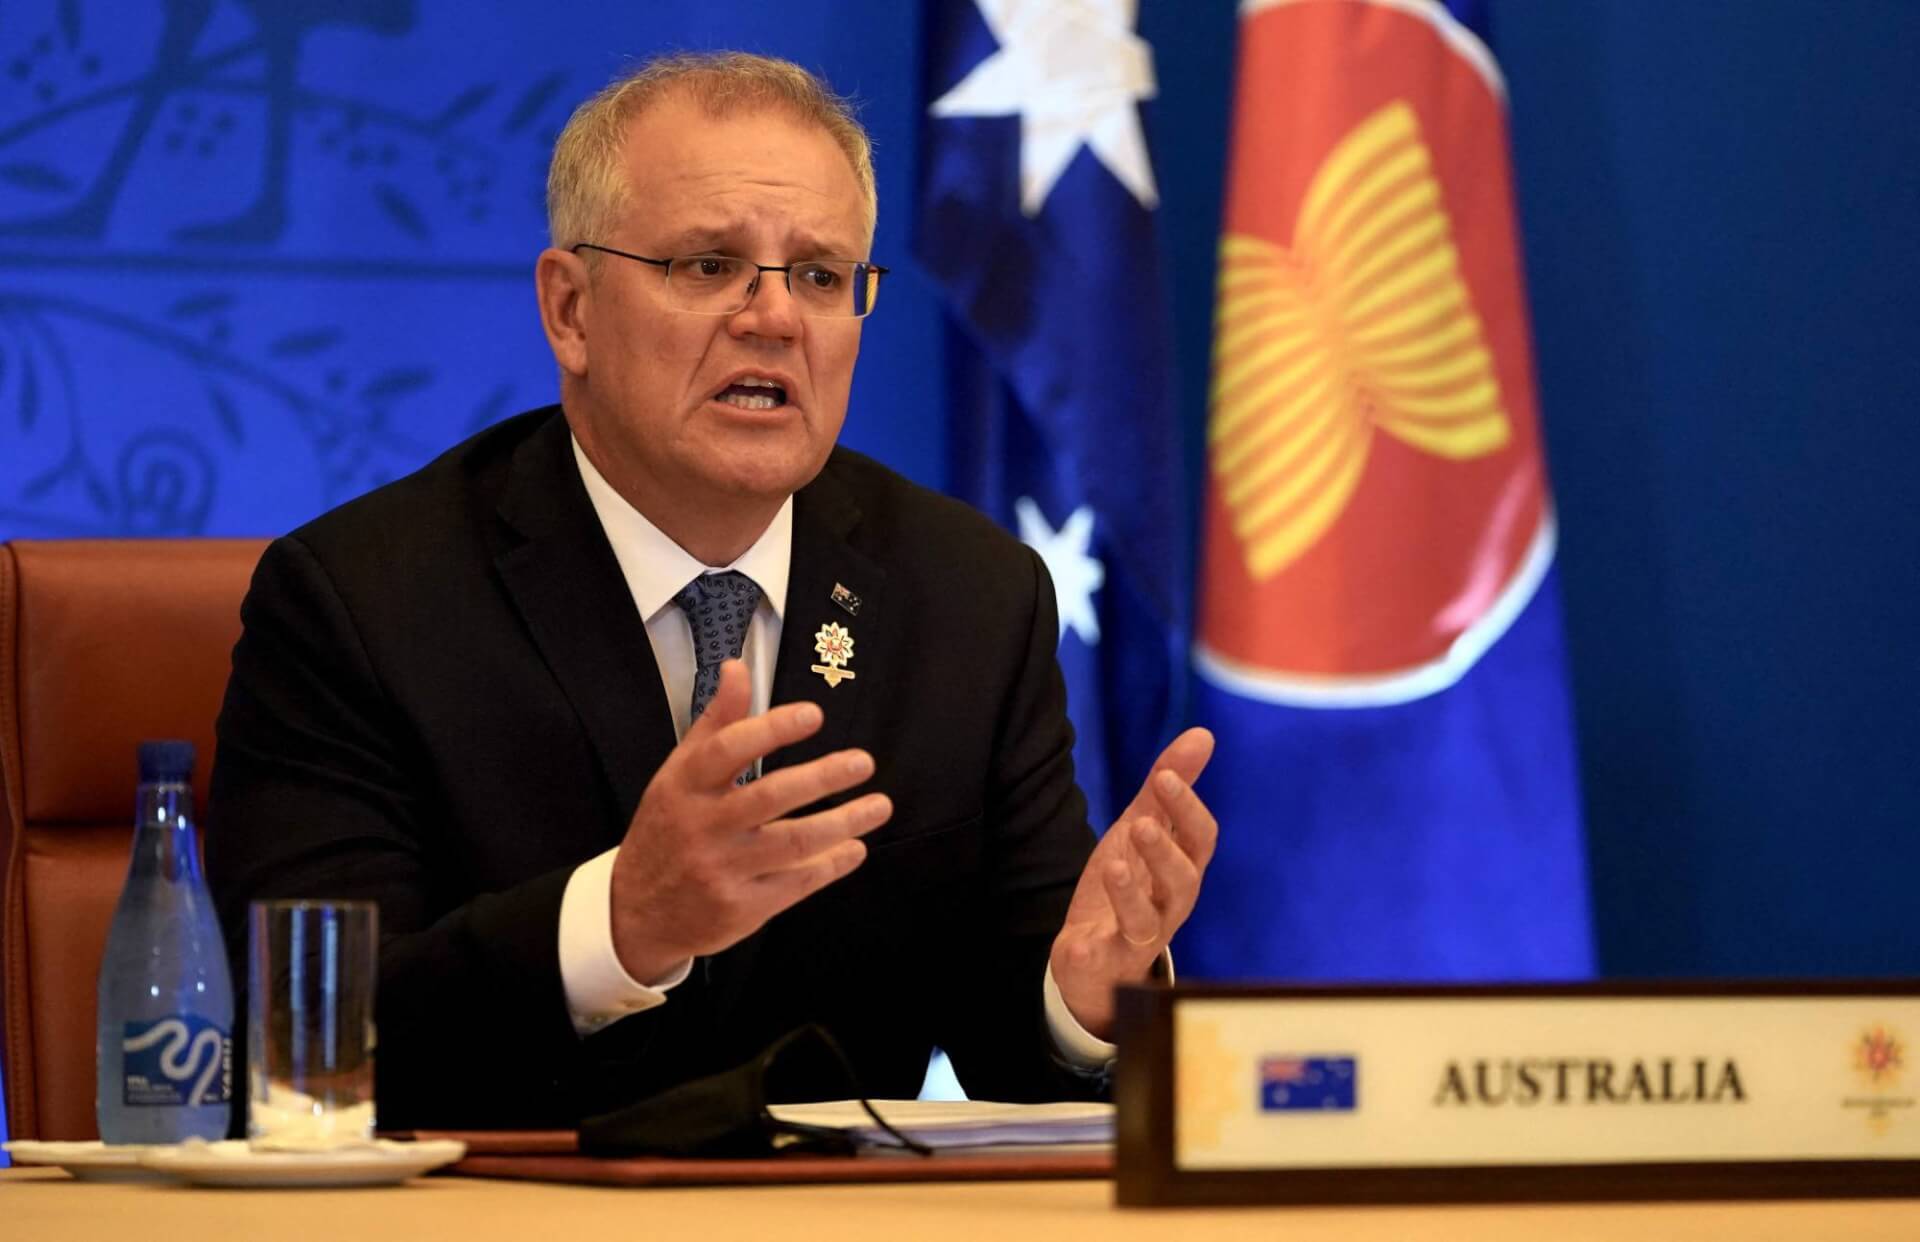 Australia, ASEAN Leaders Announce New Partnership to Expand Influence in Indo-Pacific